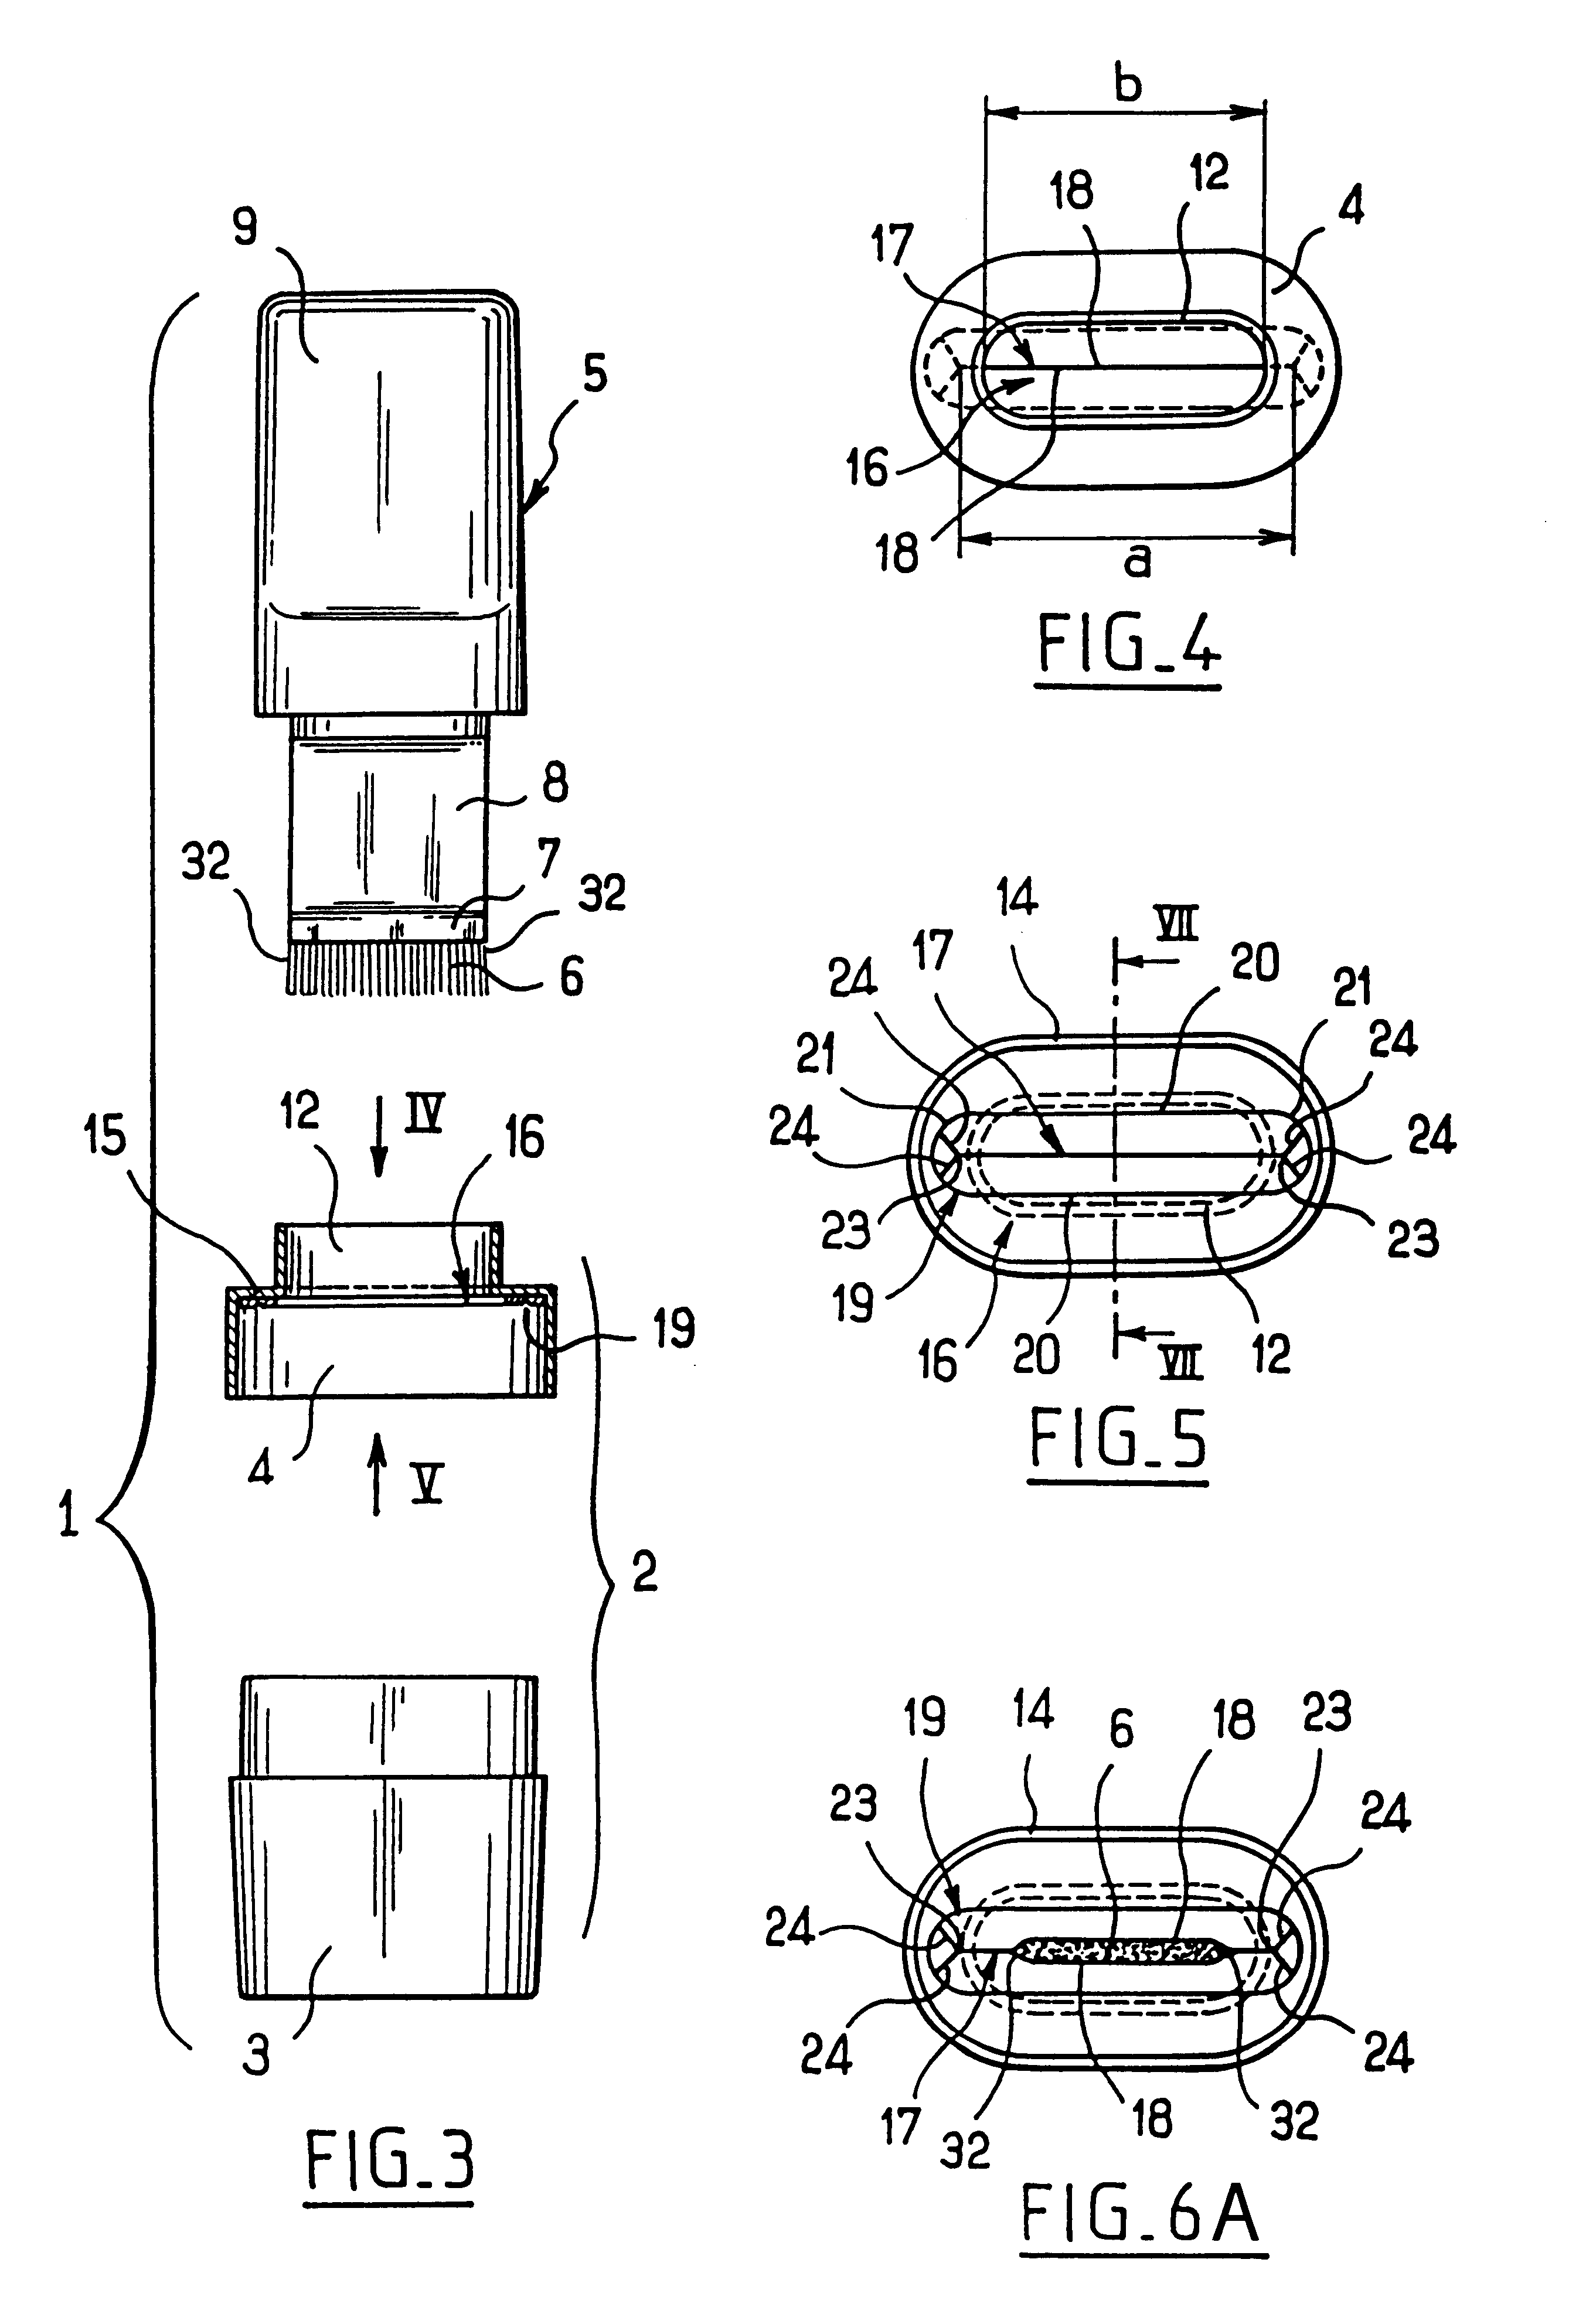 Device for packaging and applying a substance, the device having a wiper member with a slot